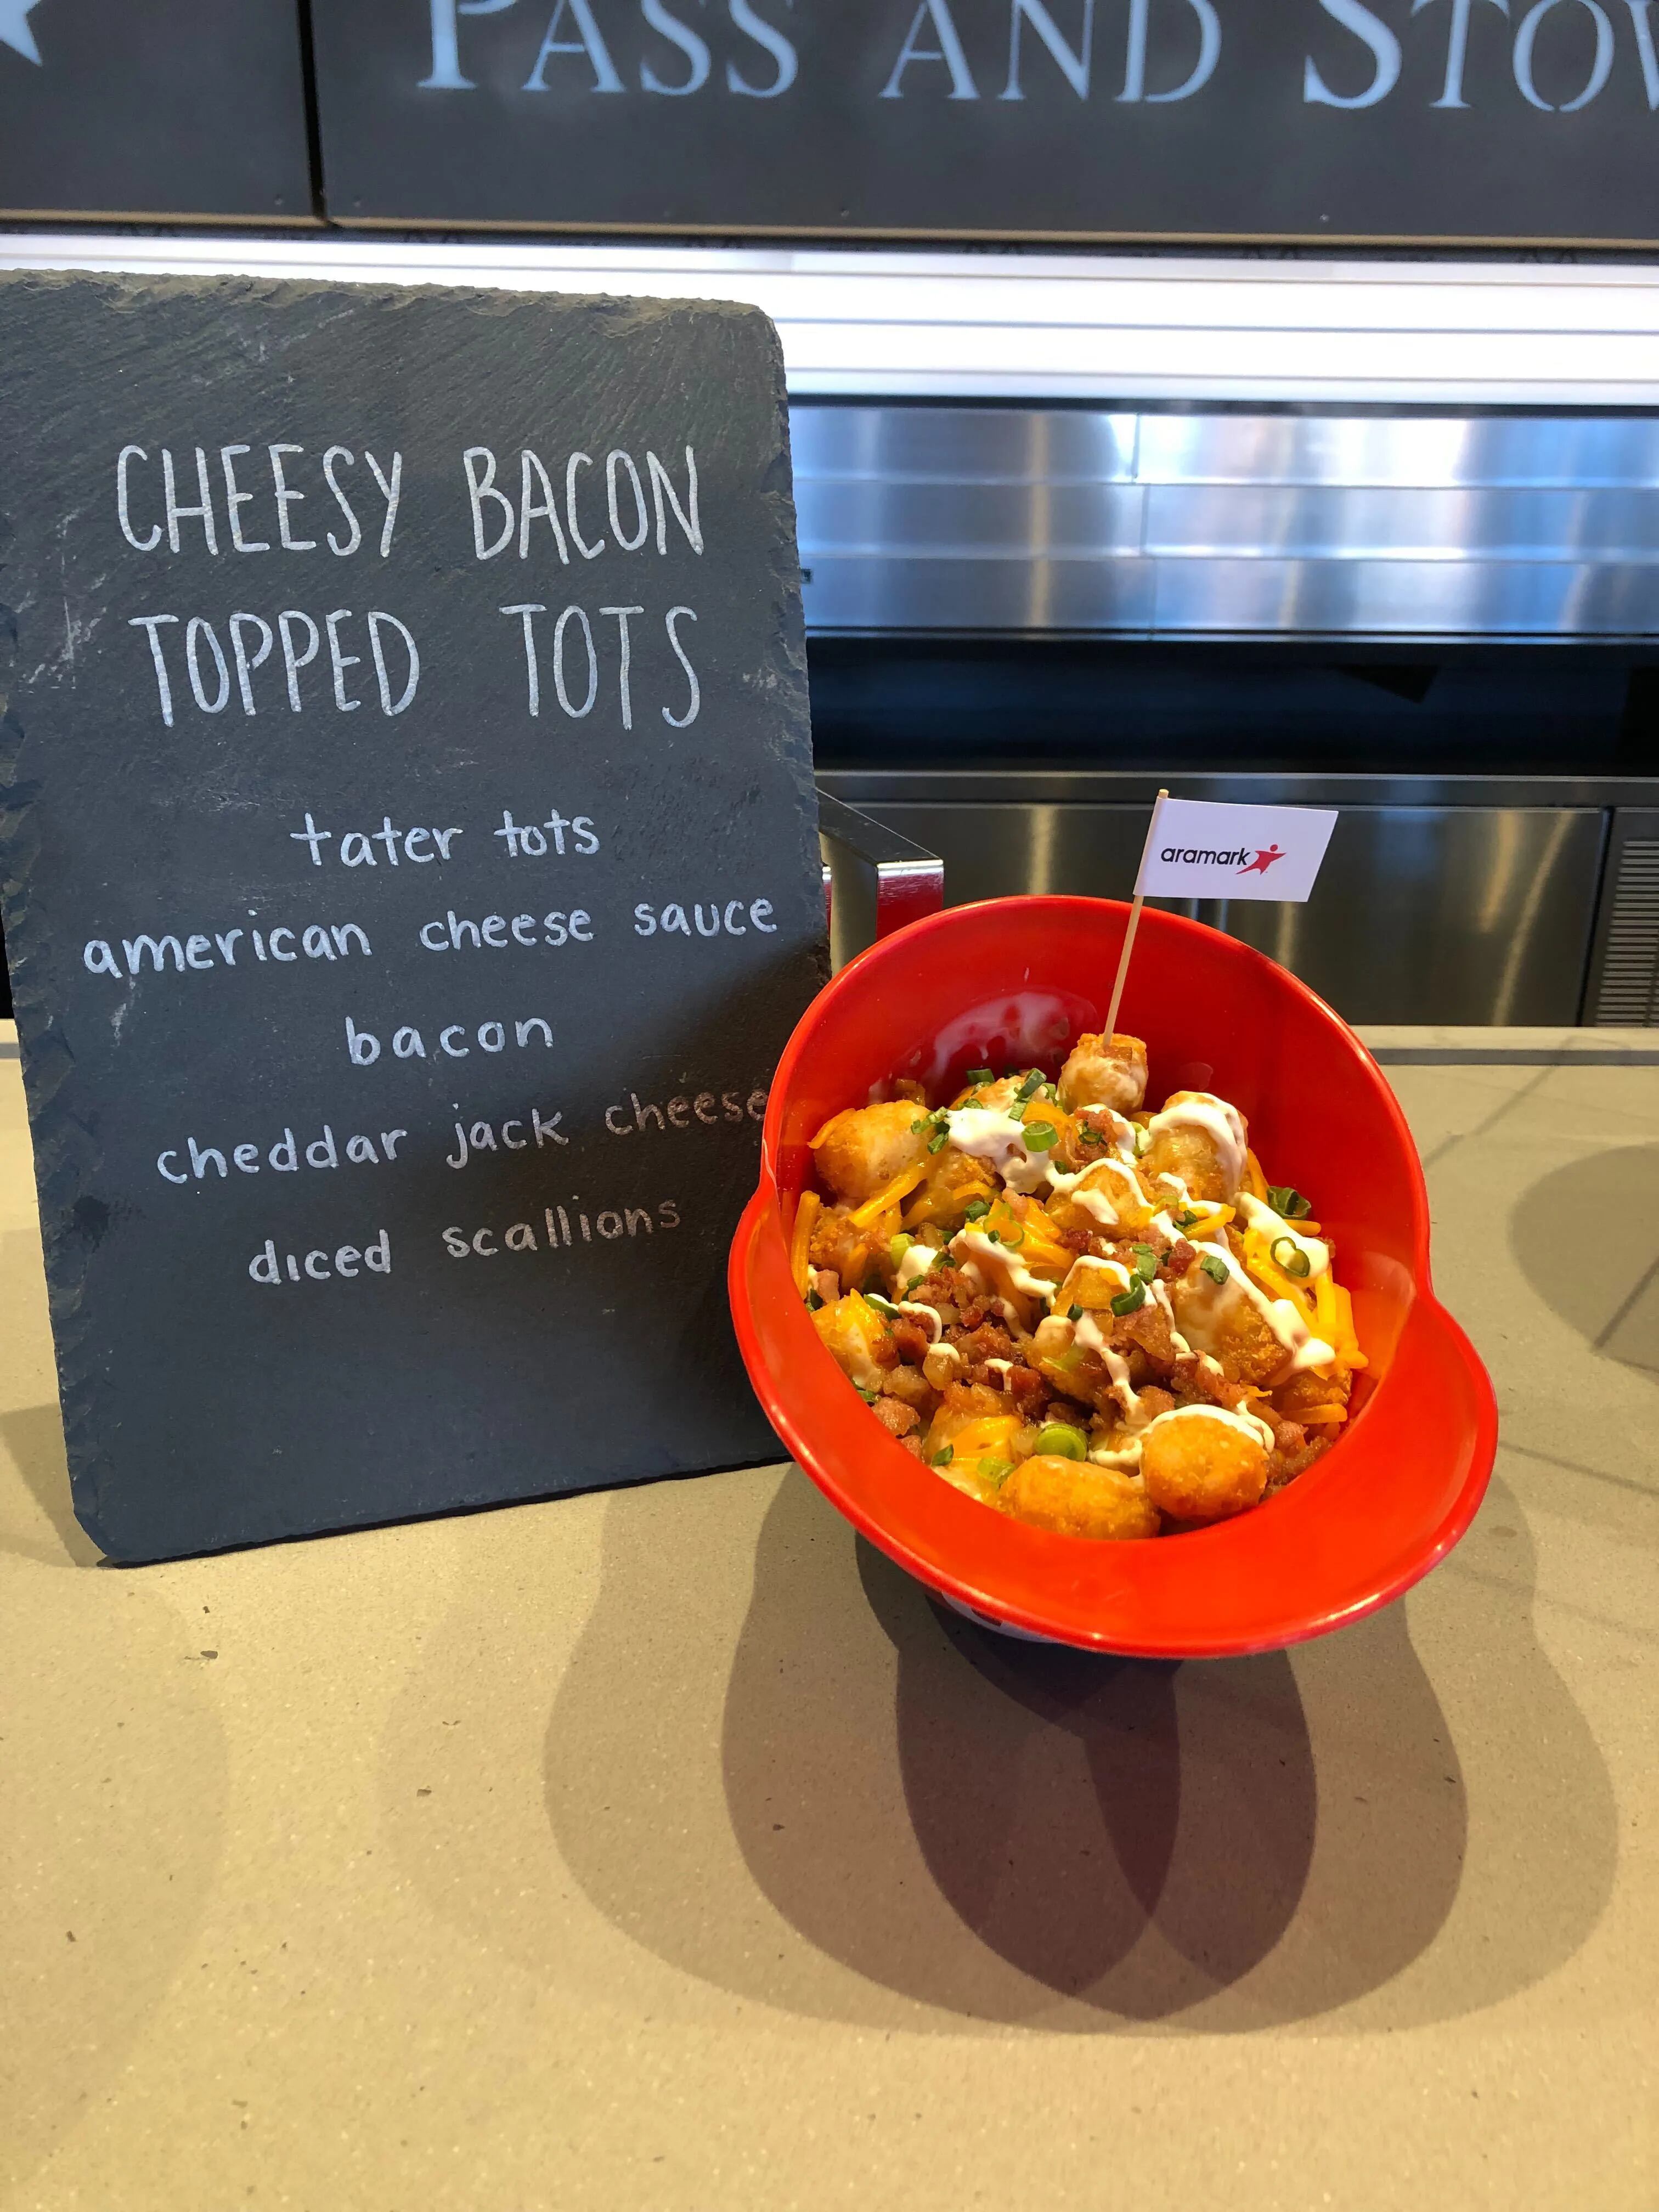 Phillies ballpark food: What's new at Citizens Bank Park